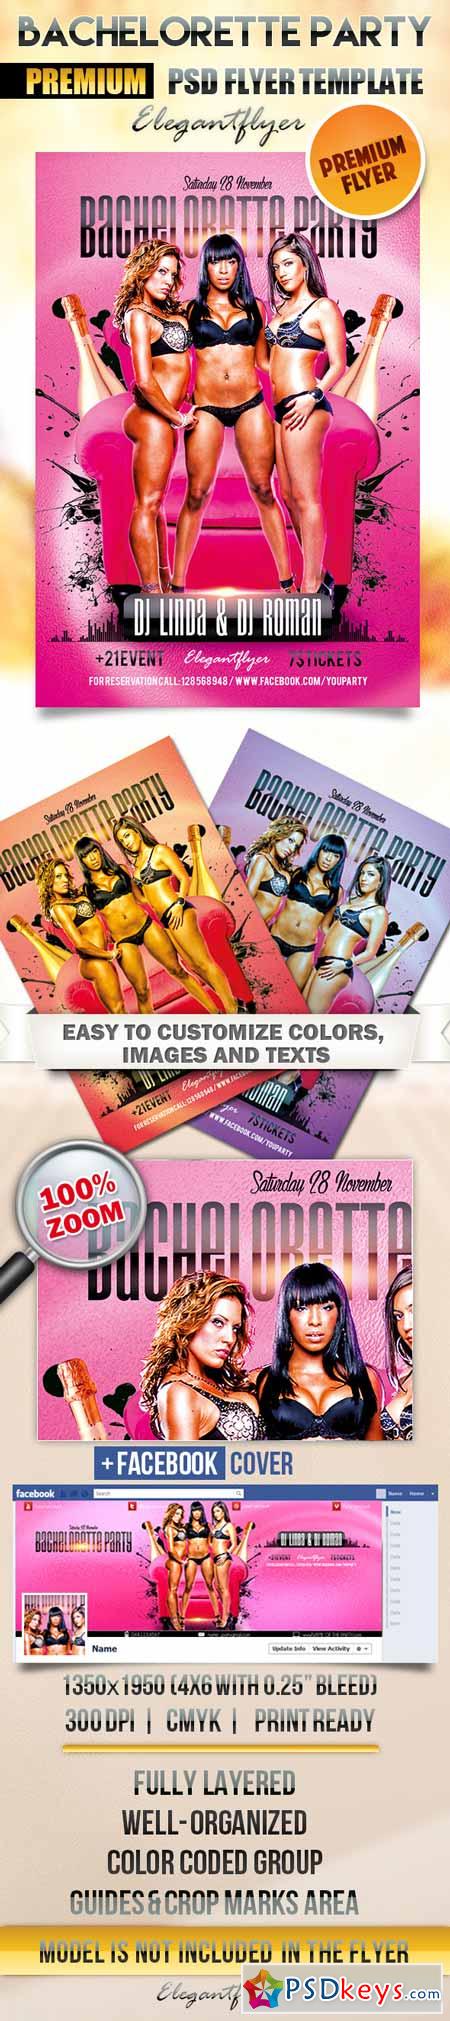 Bachelorette party  Flyer PSD Template + Facebook Cover